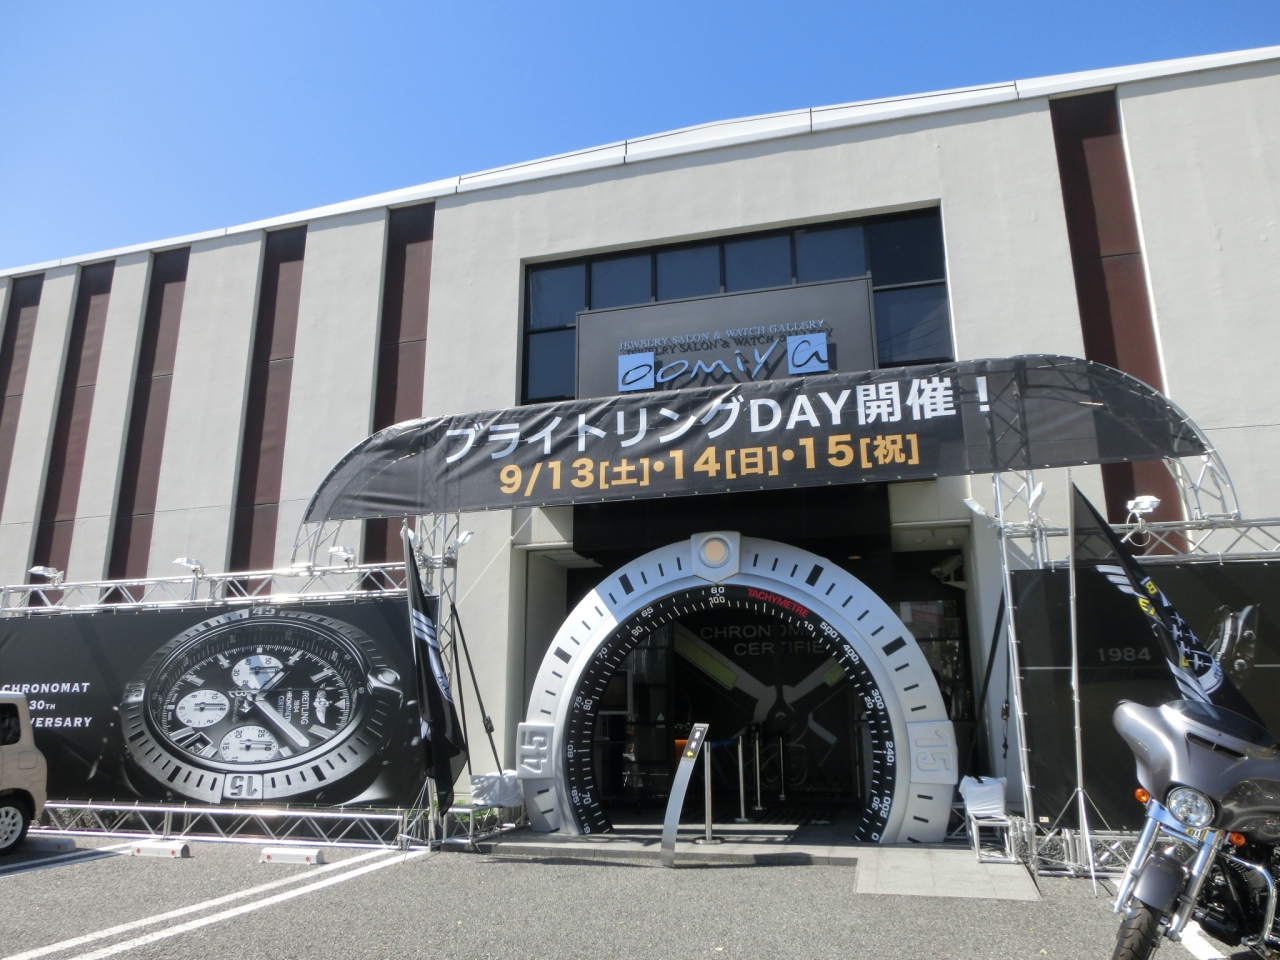 BREITLING DAY 2014 最終日です☆